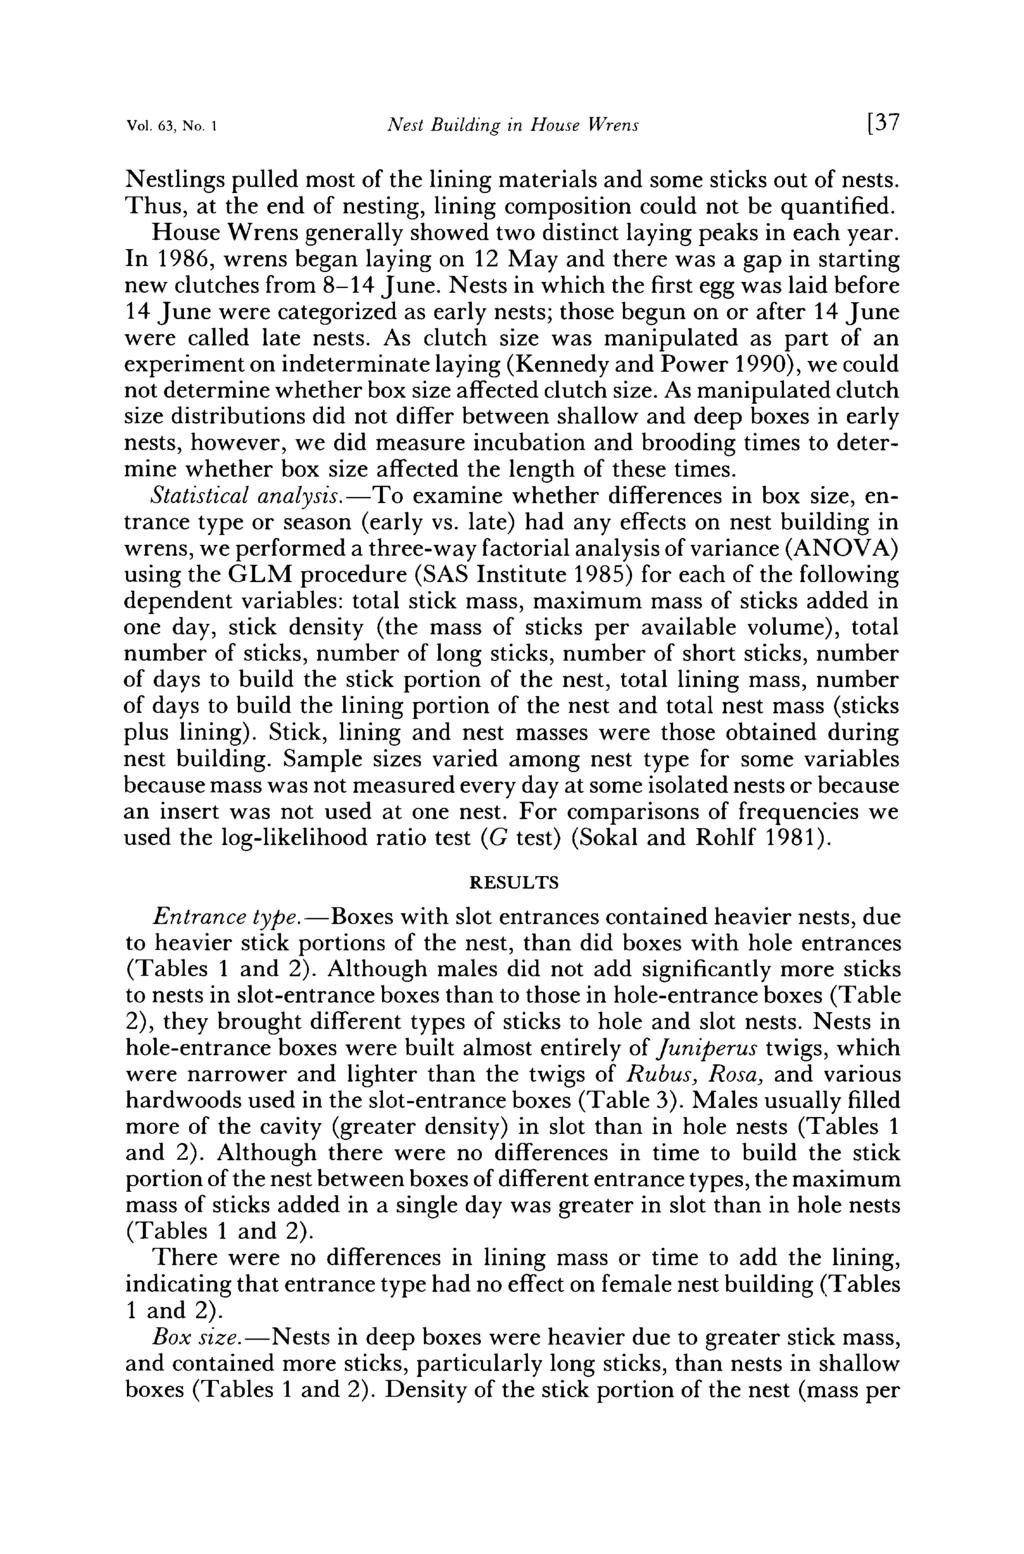 Vol. 63, No. I Nest Building in House Wrens [37 Nestlings pulled most of the lining materials and some sticks out of nests. Thus, at the end of nesting, lining composition could not be quantified.